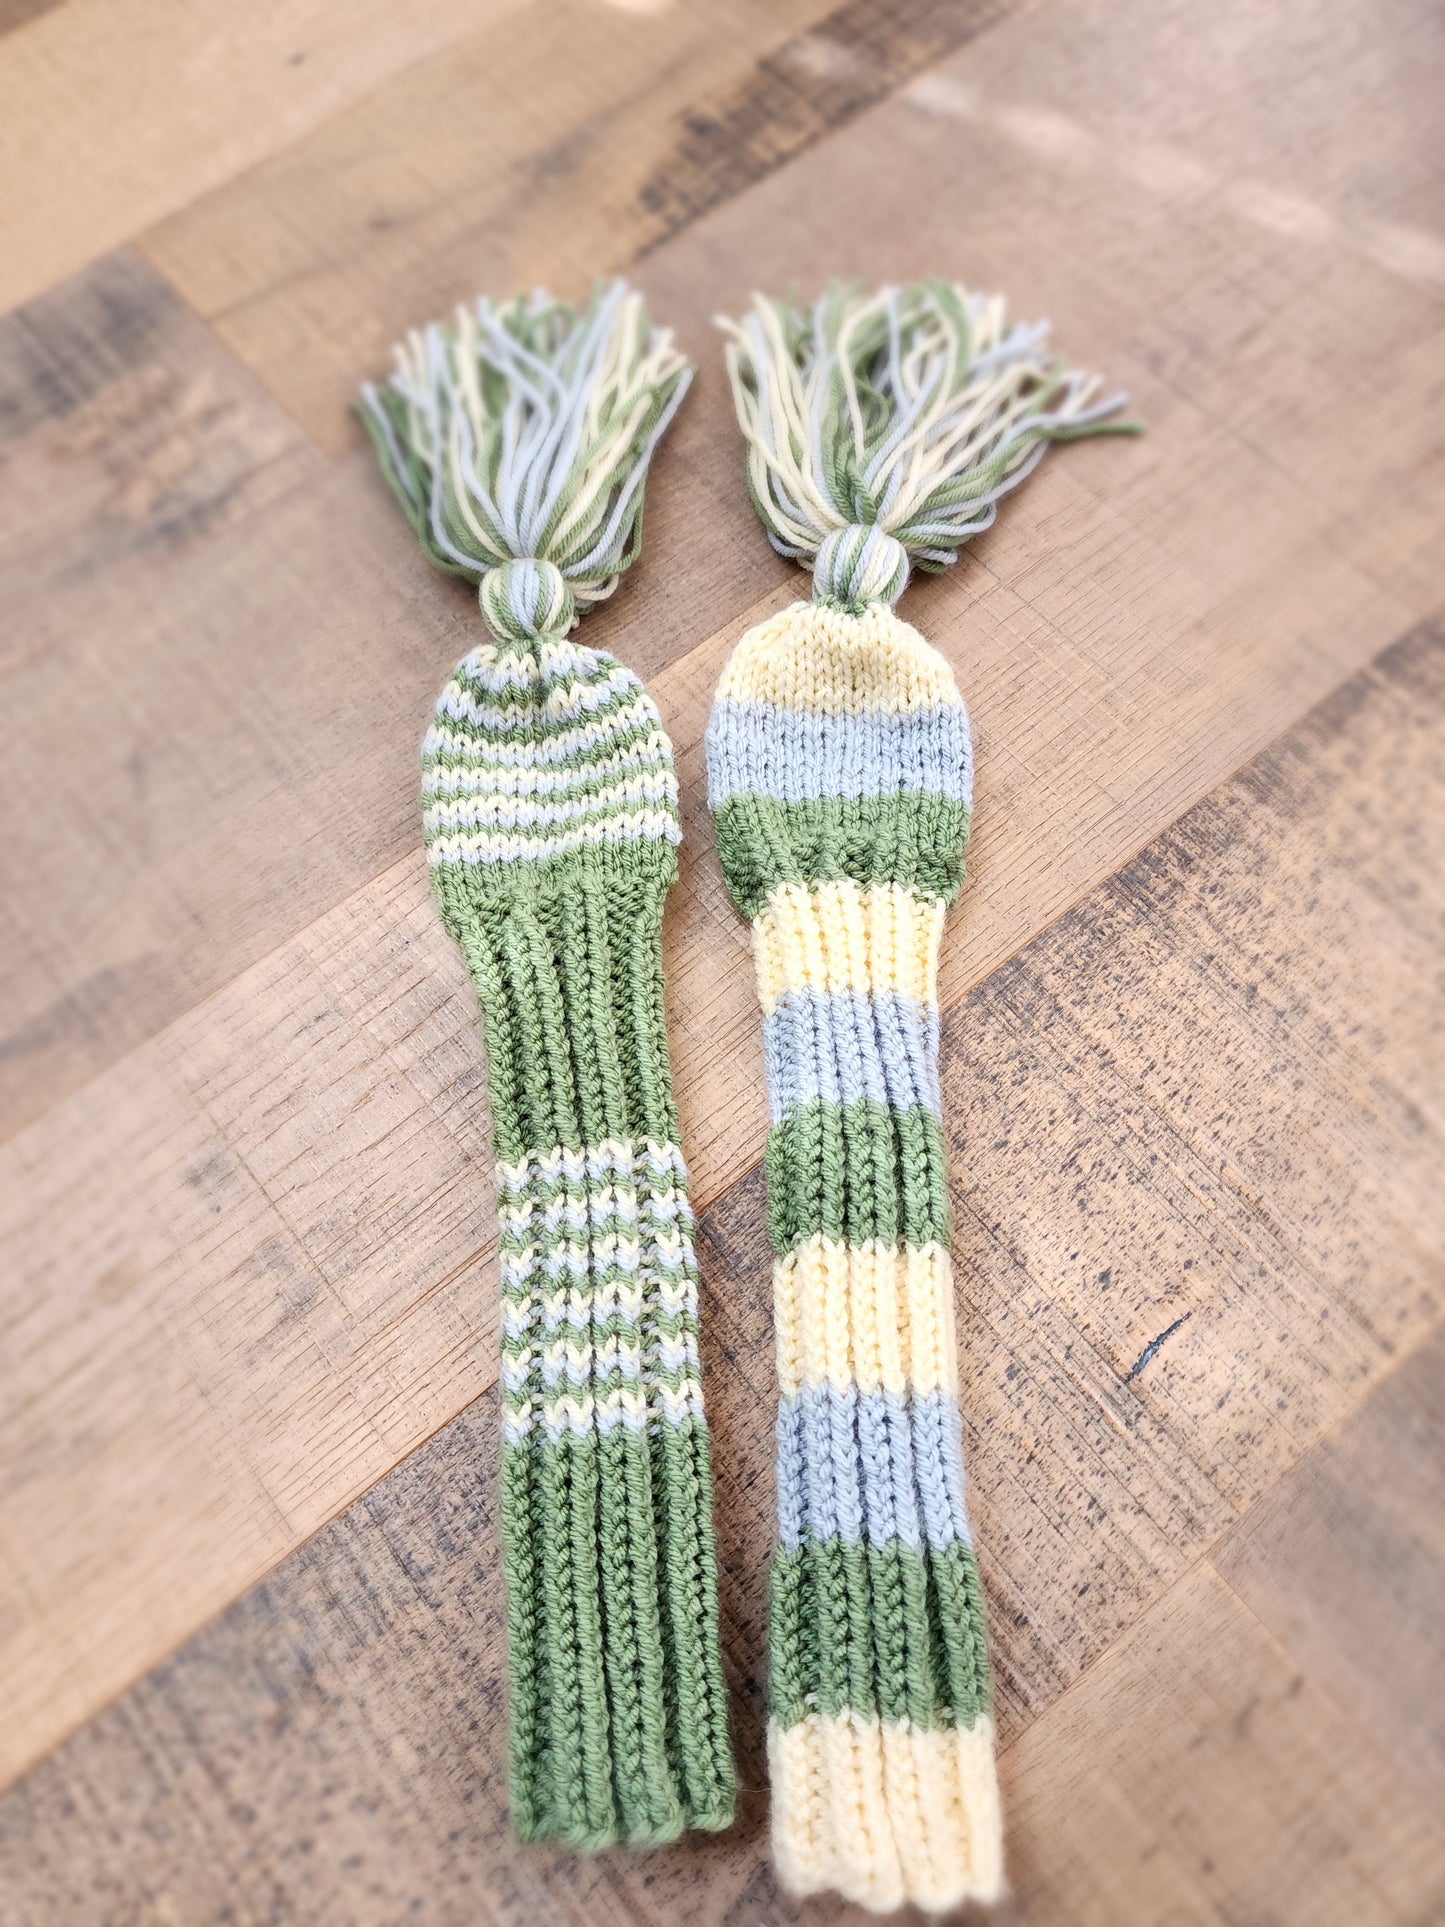 Two Golf Club Head Covers Retro-Vintage Green, Yellow & Gray with Tassels for Fairway Woods